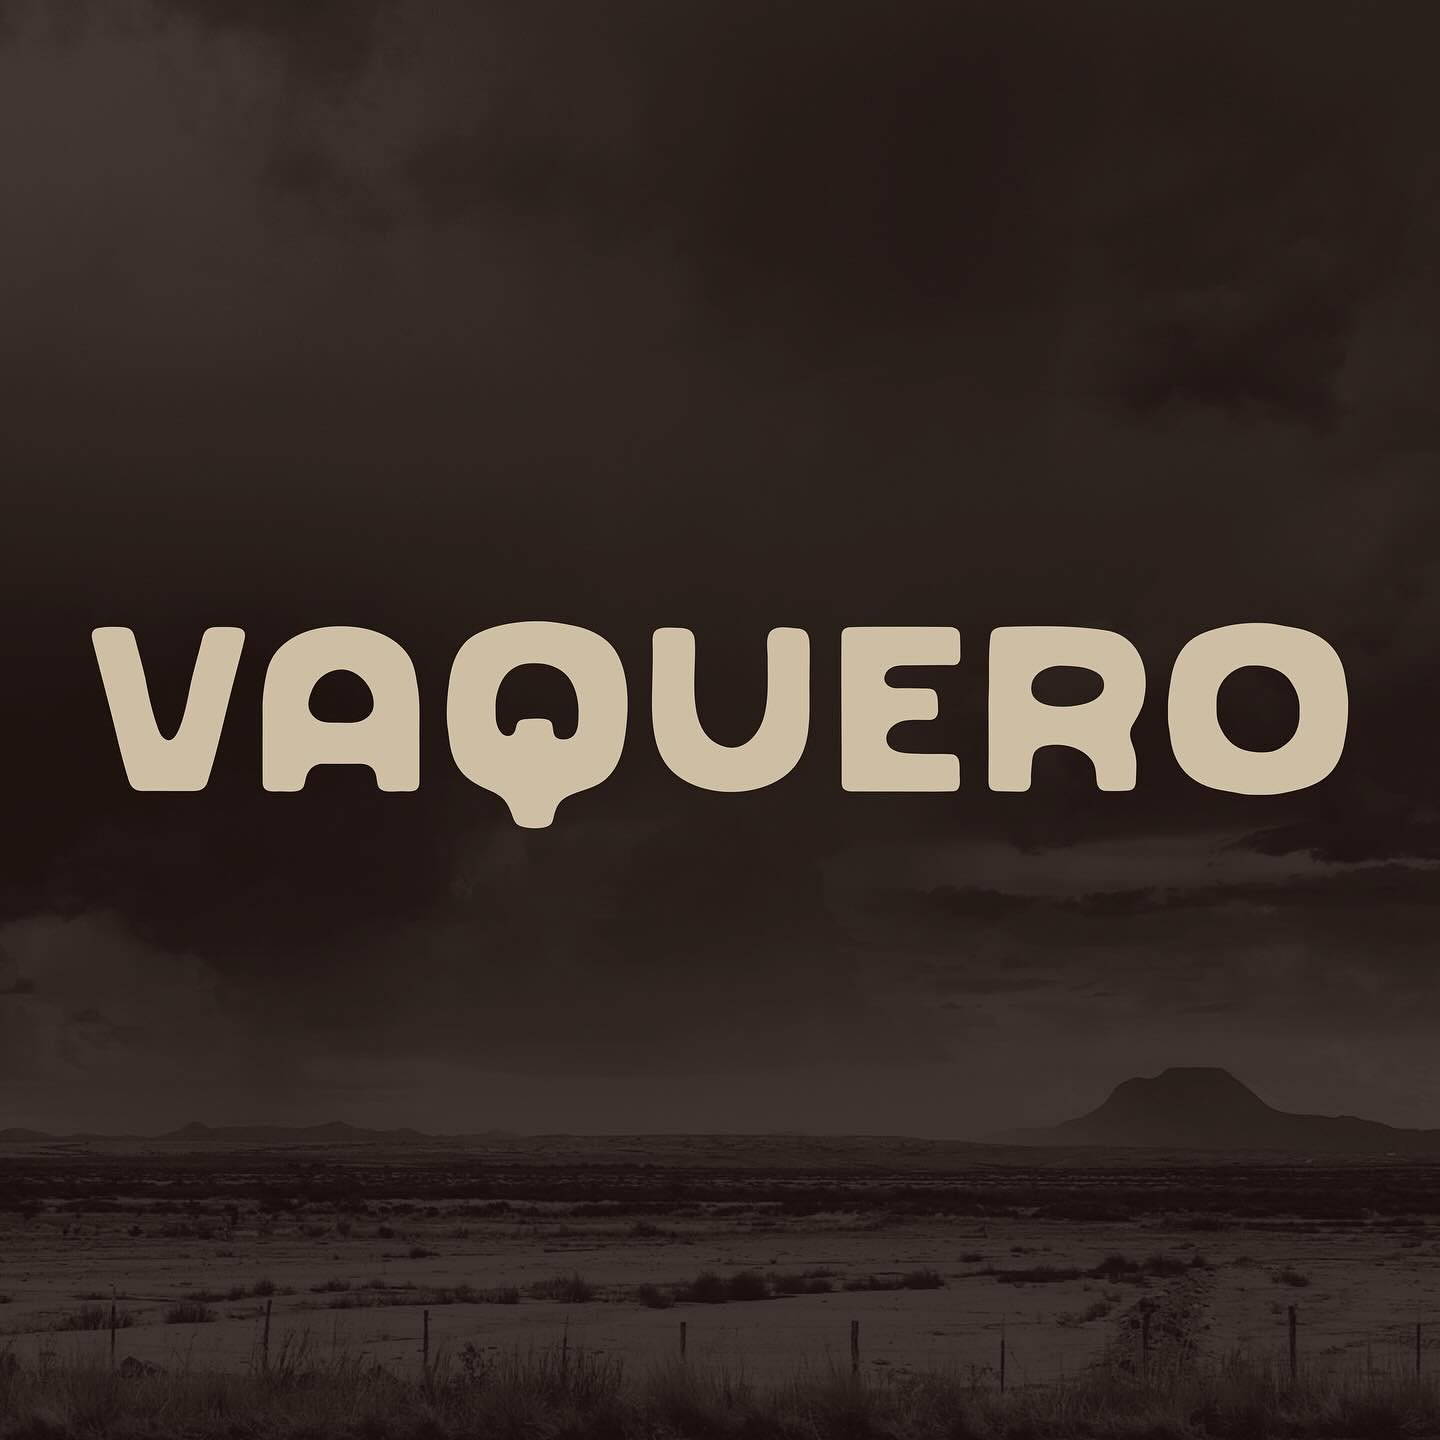 Vaquero- the newest typeface from the studio 🤠 

Vaquero is a rounded all caps typeface inspired by the weathered West. Now available on @creativemarket 

#creativemarket #typefacedesign #handmadetype